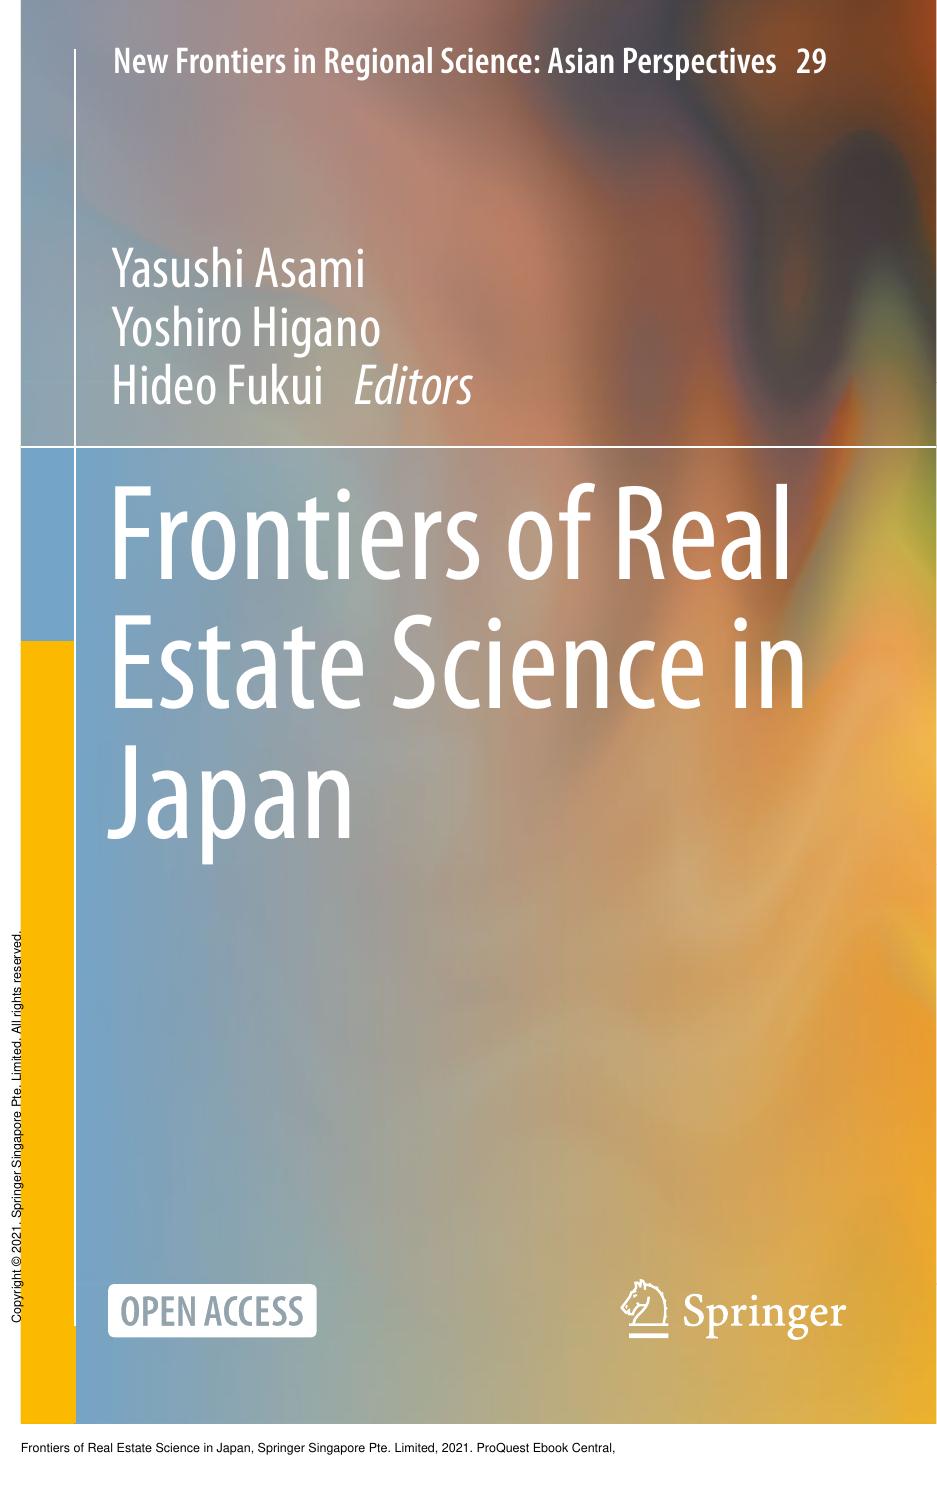 Frontiers of Real Estate Science in Japan by Yasushi Asami; Yoshiro Higano; Hideo Fukui